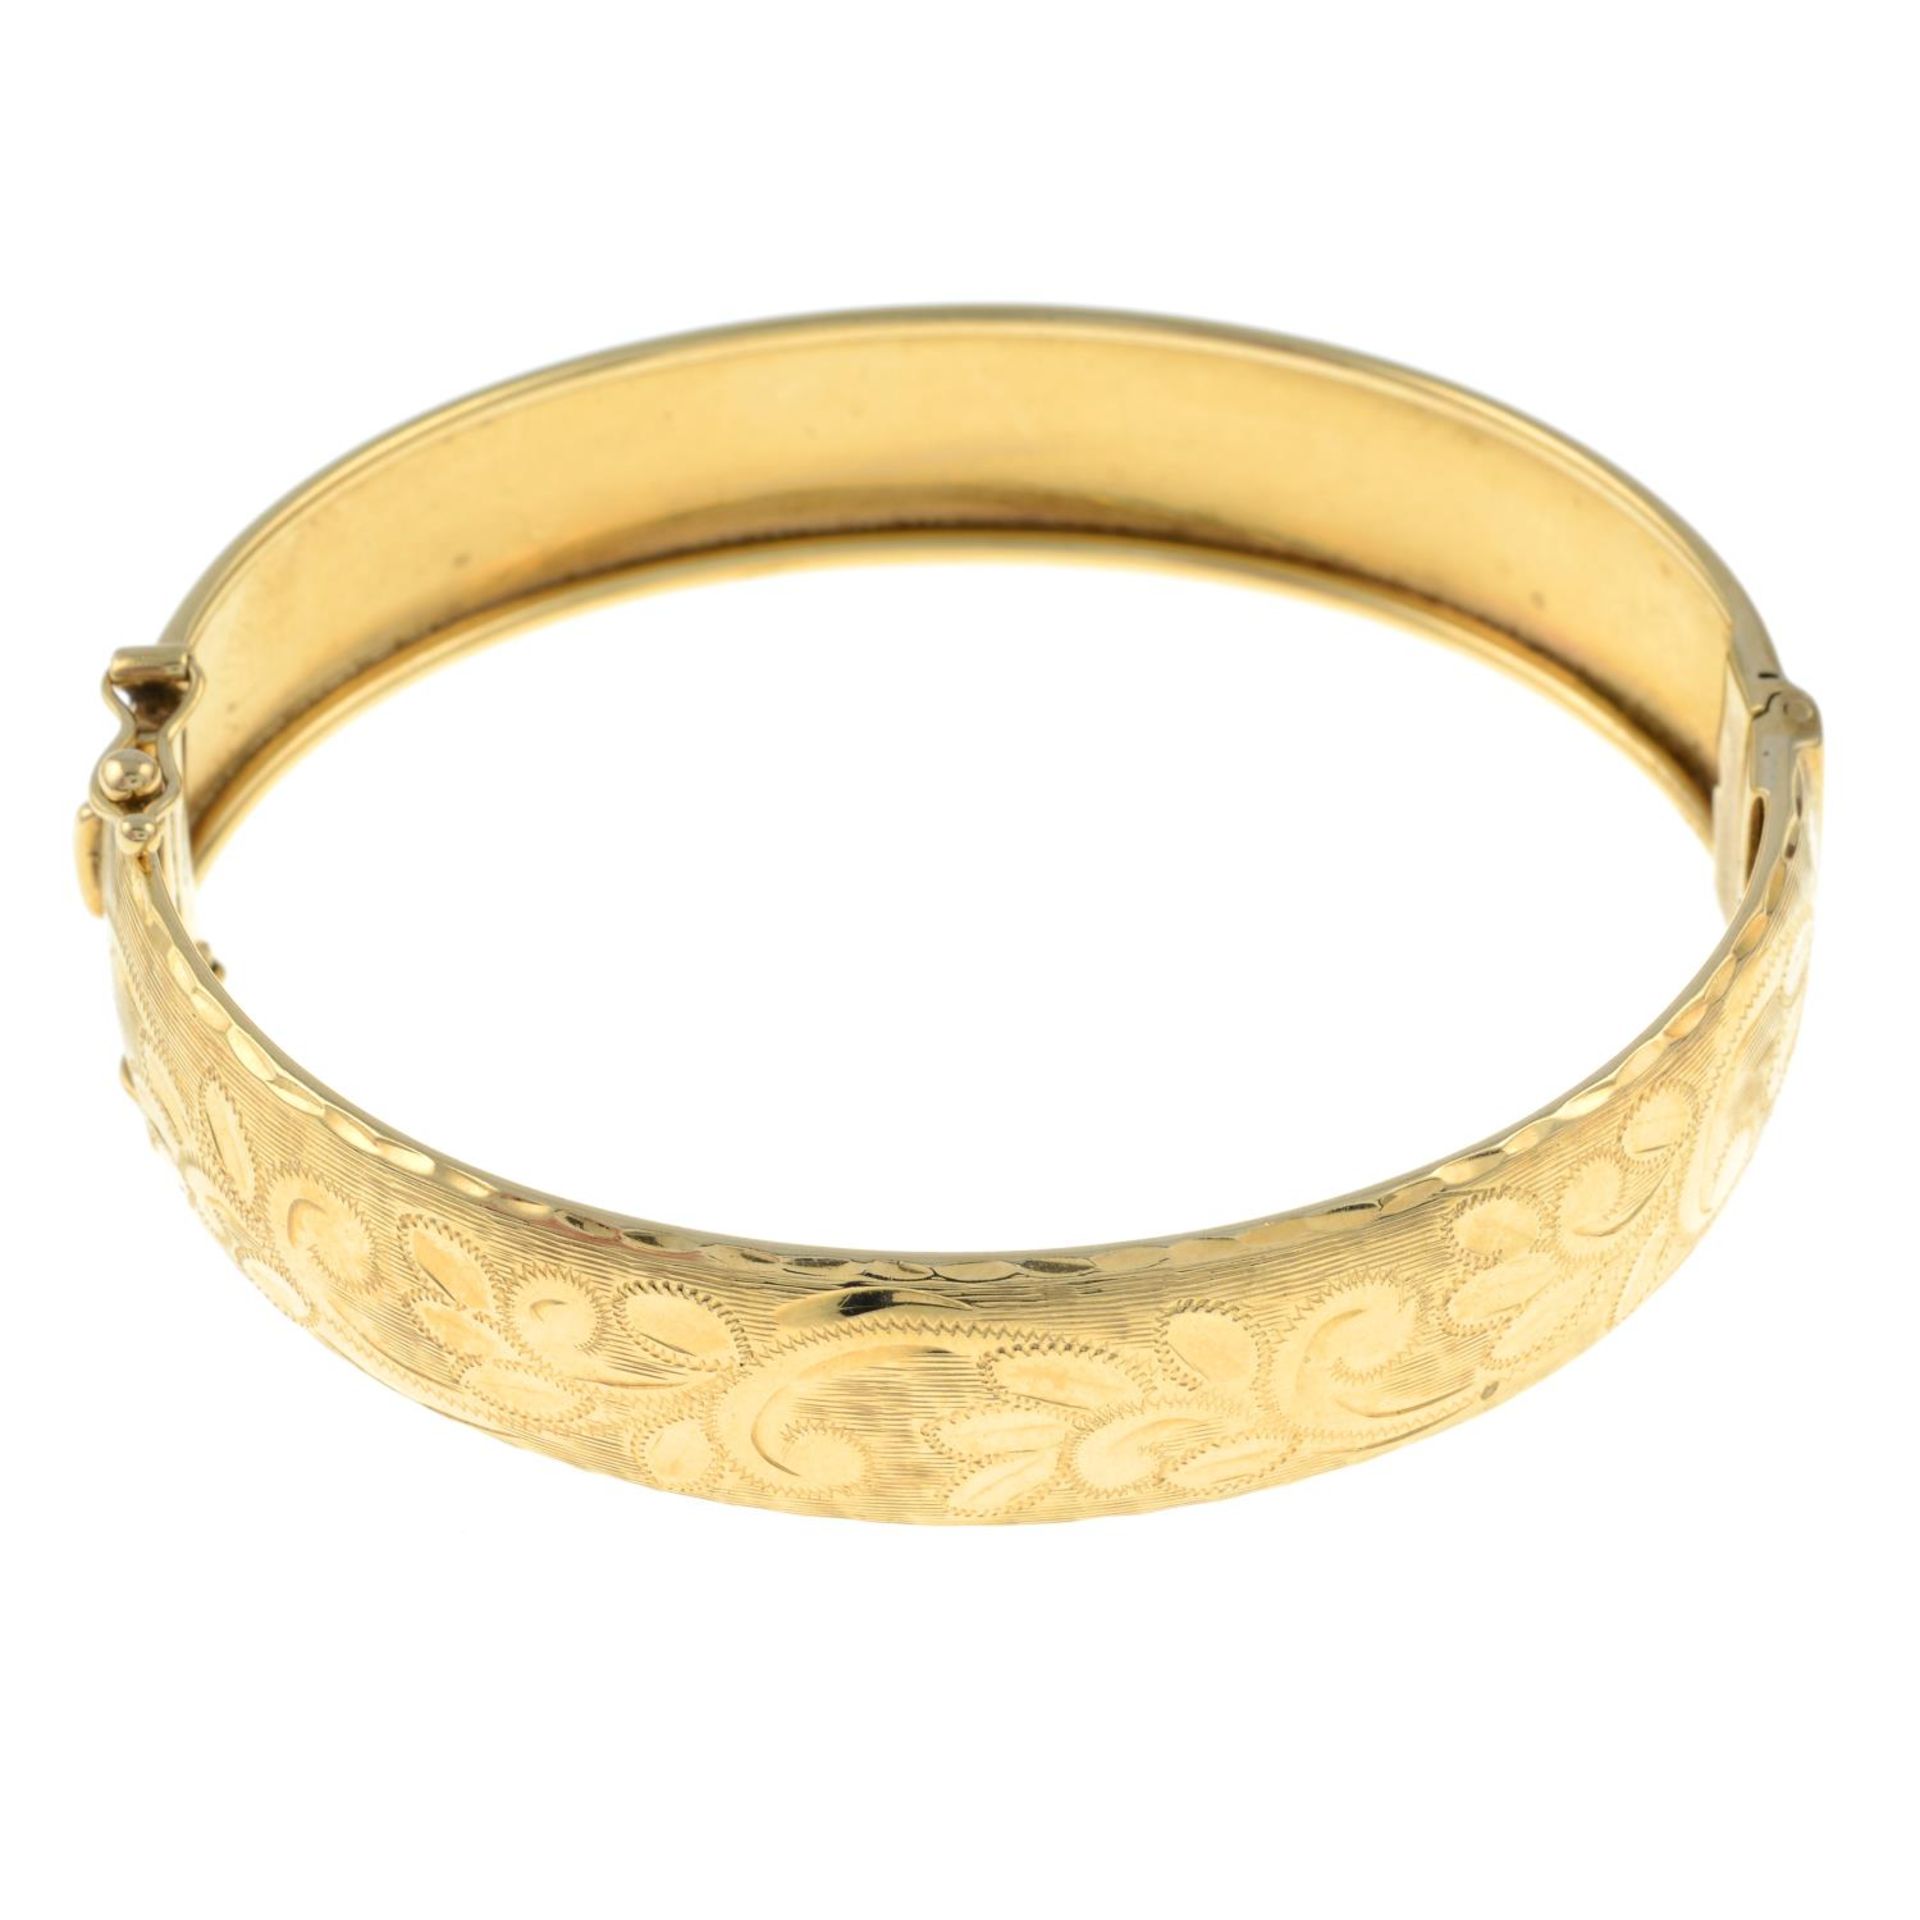 A 9ct gold engraved bangle.Hallmarks for London.